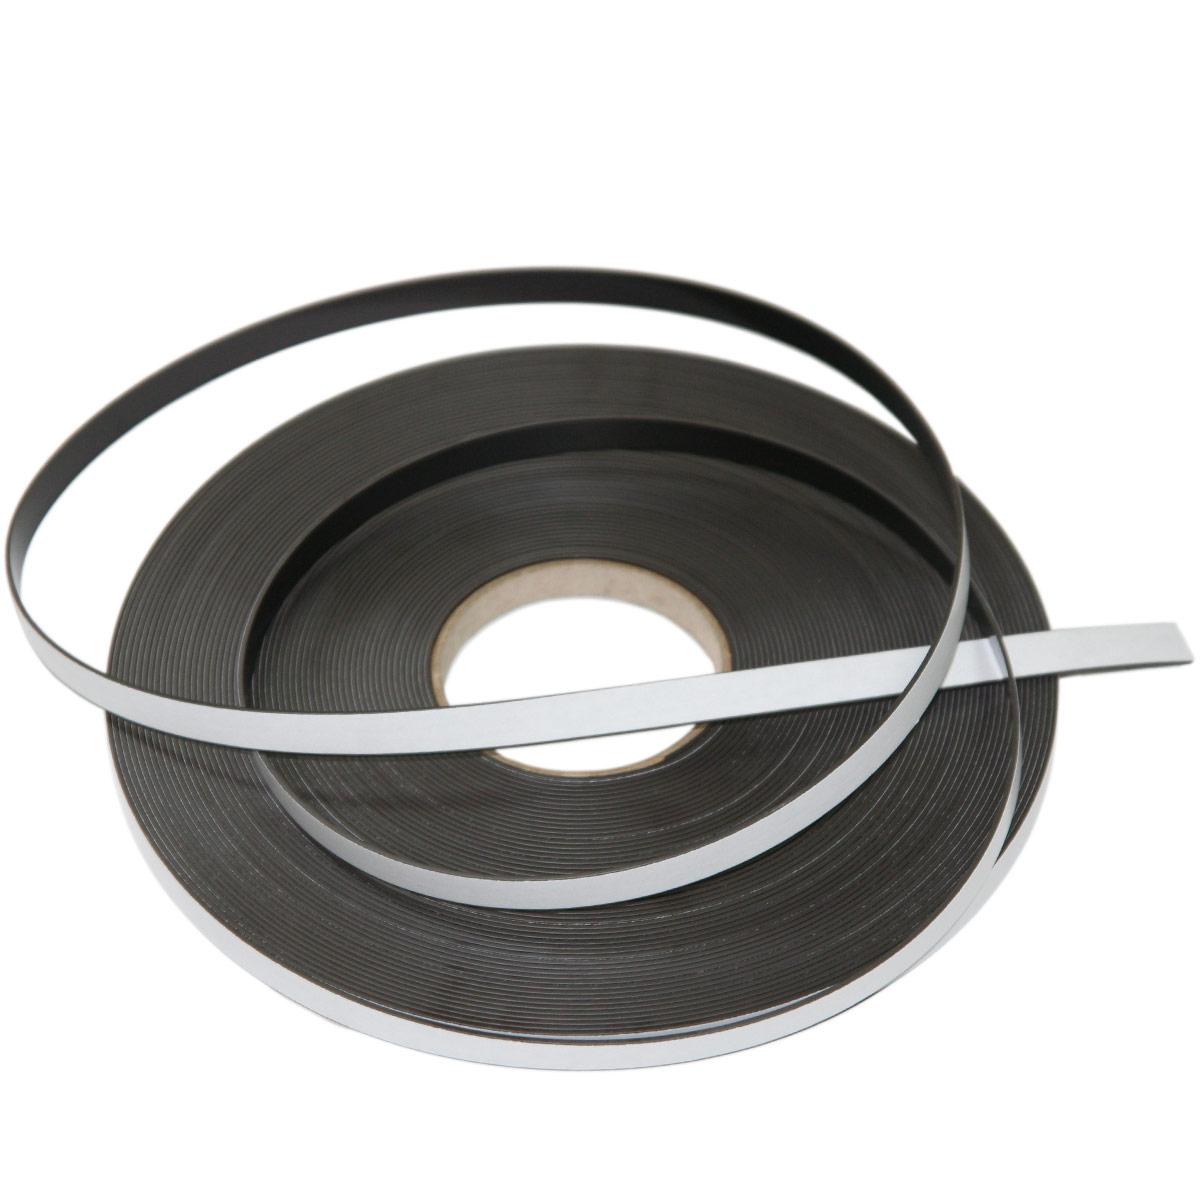 Self-adhesive magnetic tape with Standard glue Dimension: 12,7 mm x 30 m  Thickness: 1.5 mm Quantity in package: 1